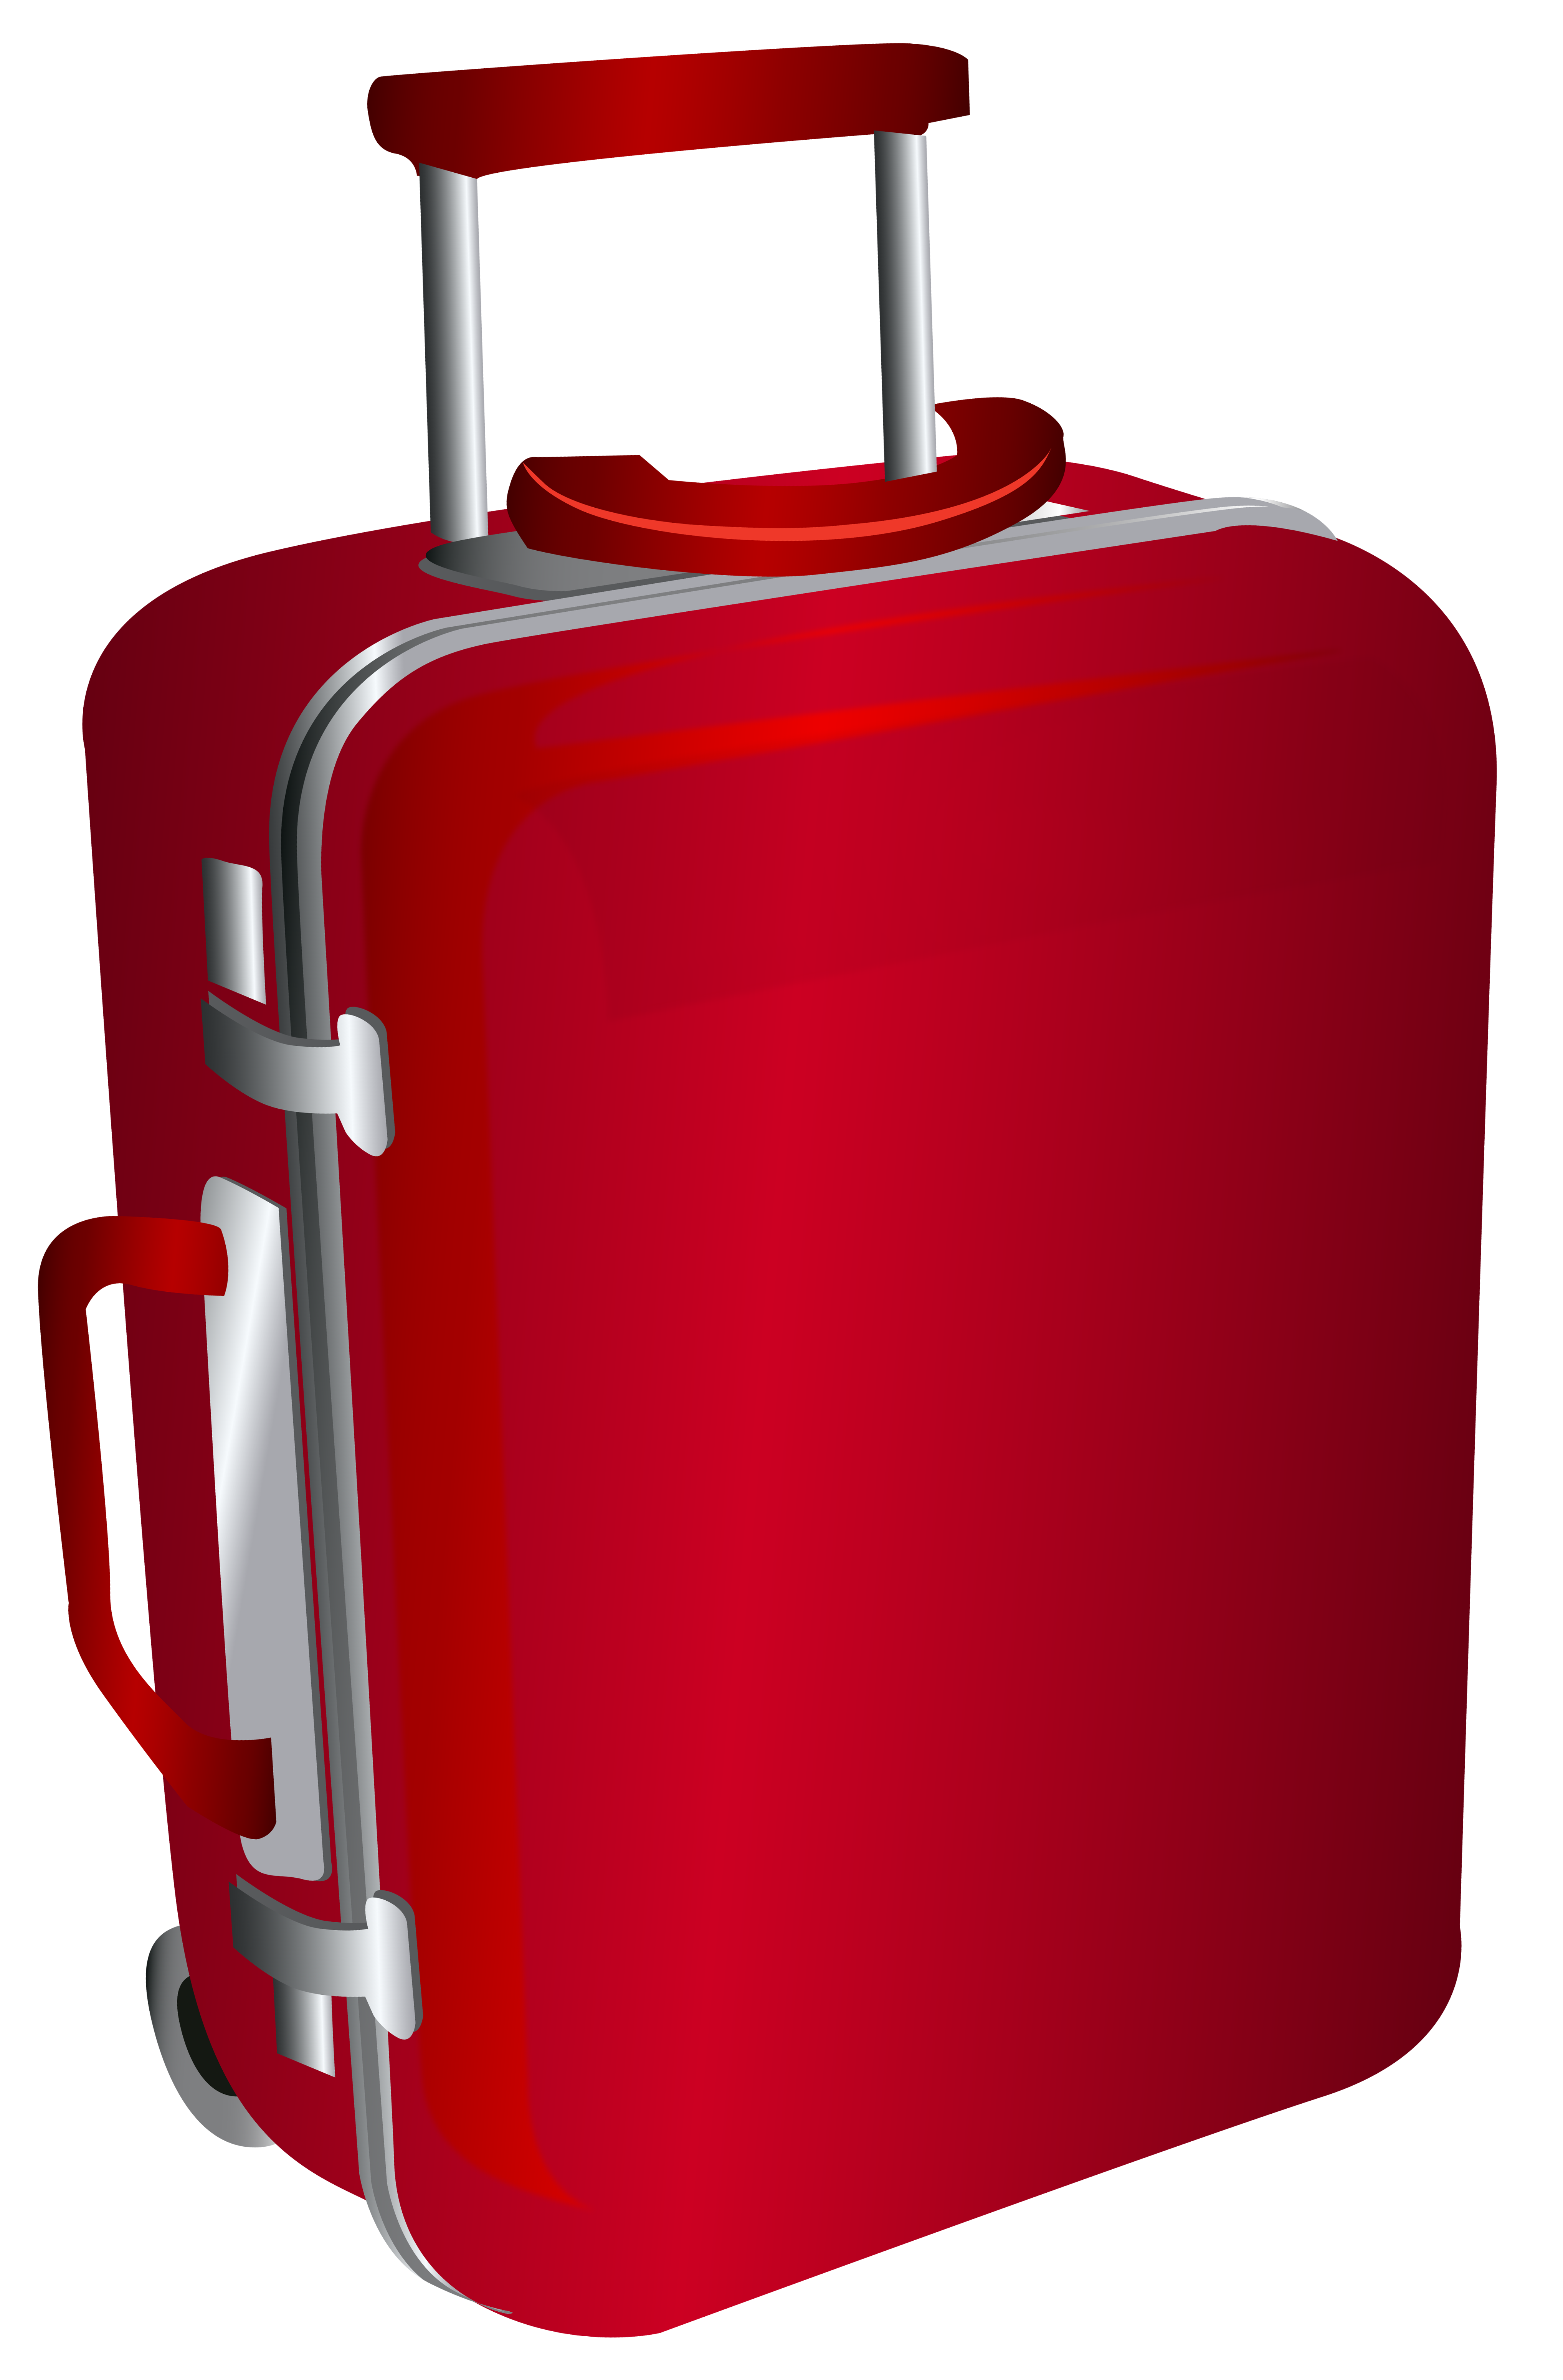 Free Cliparts Travel Luggage, Download Free Cliparts Travel Luggage png